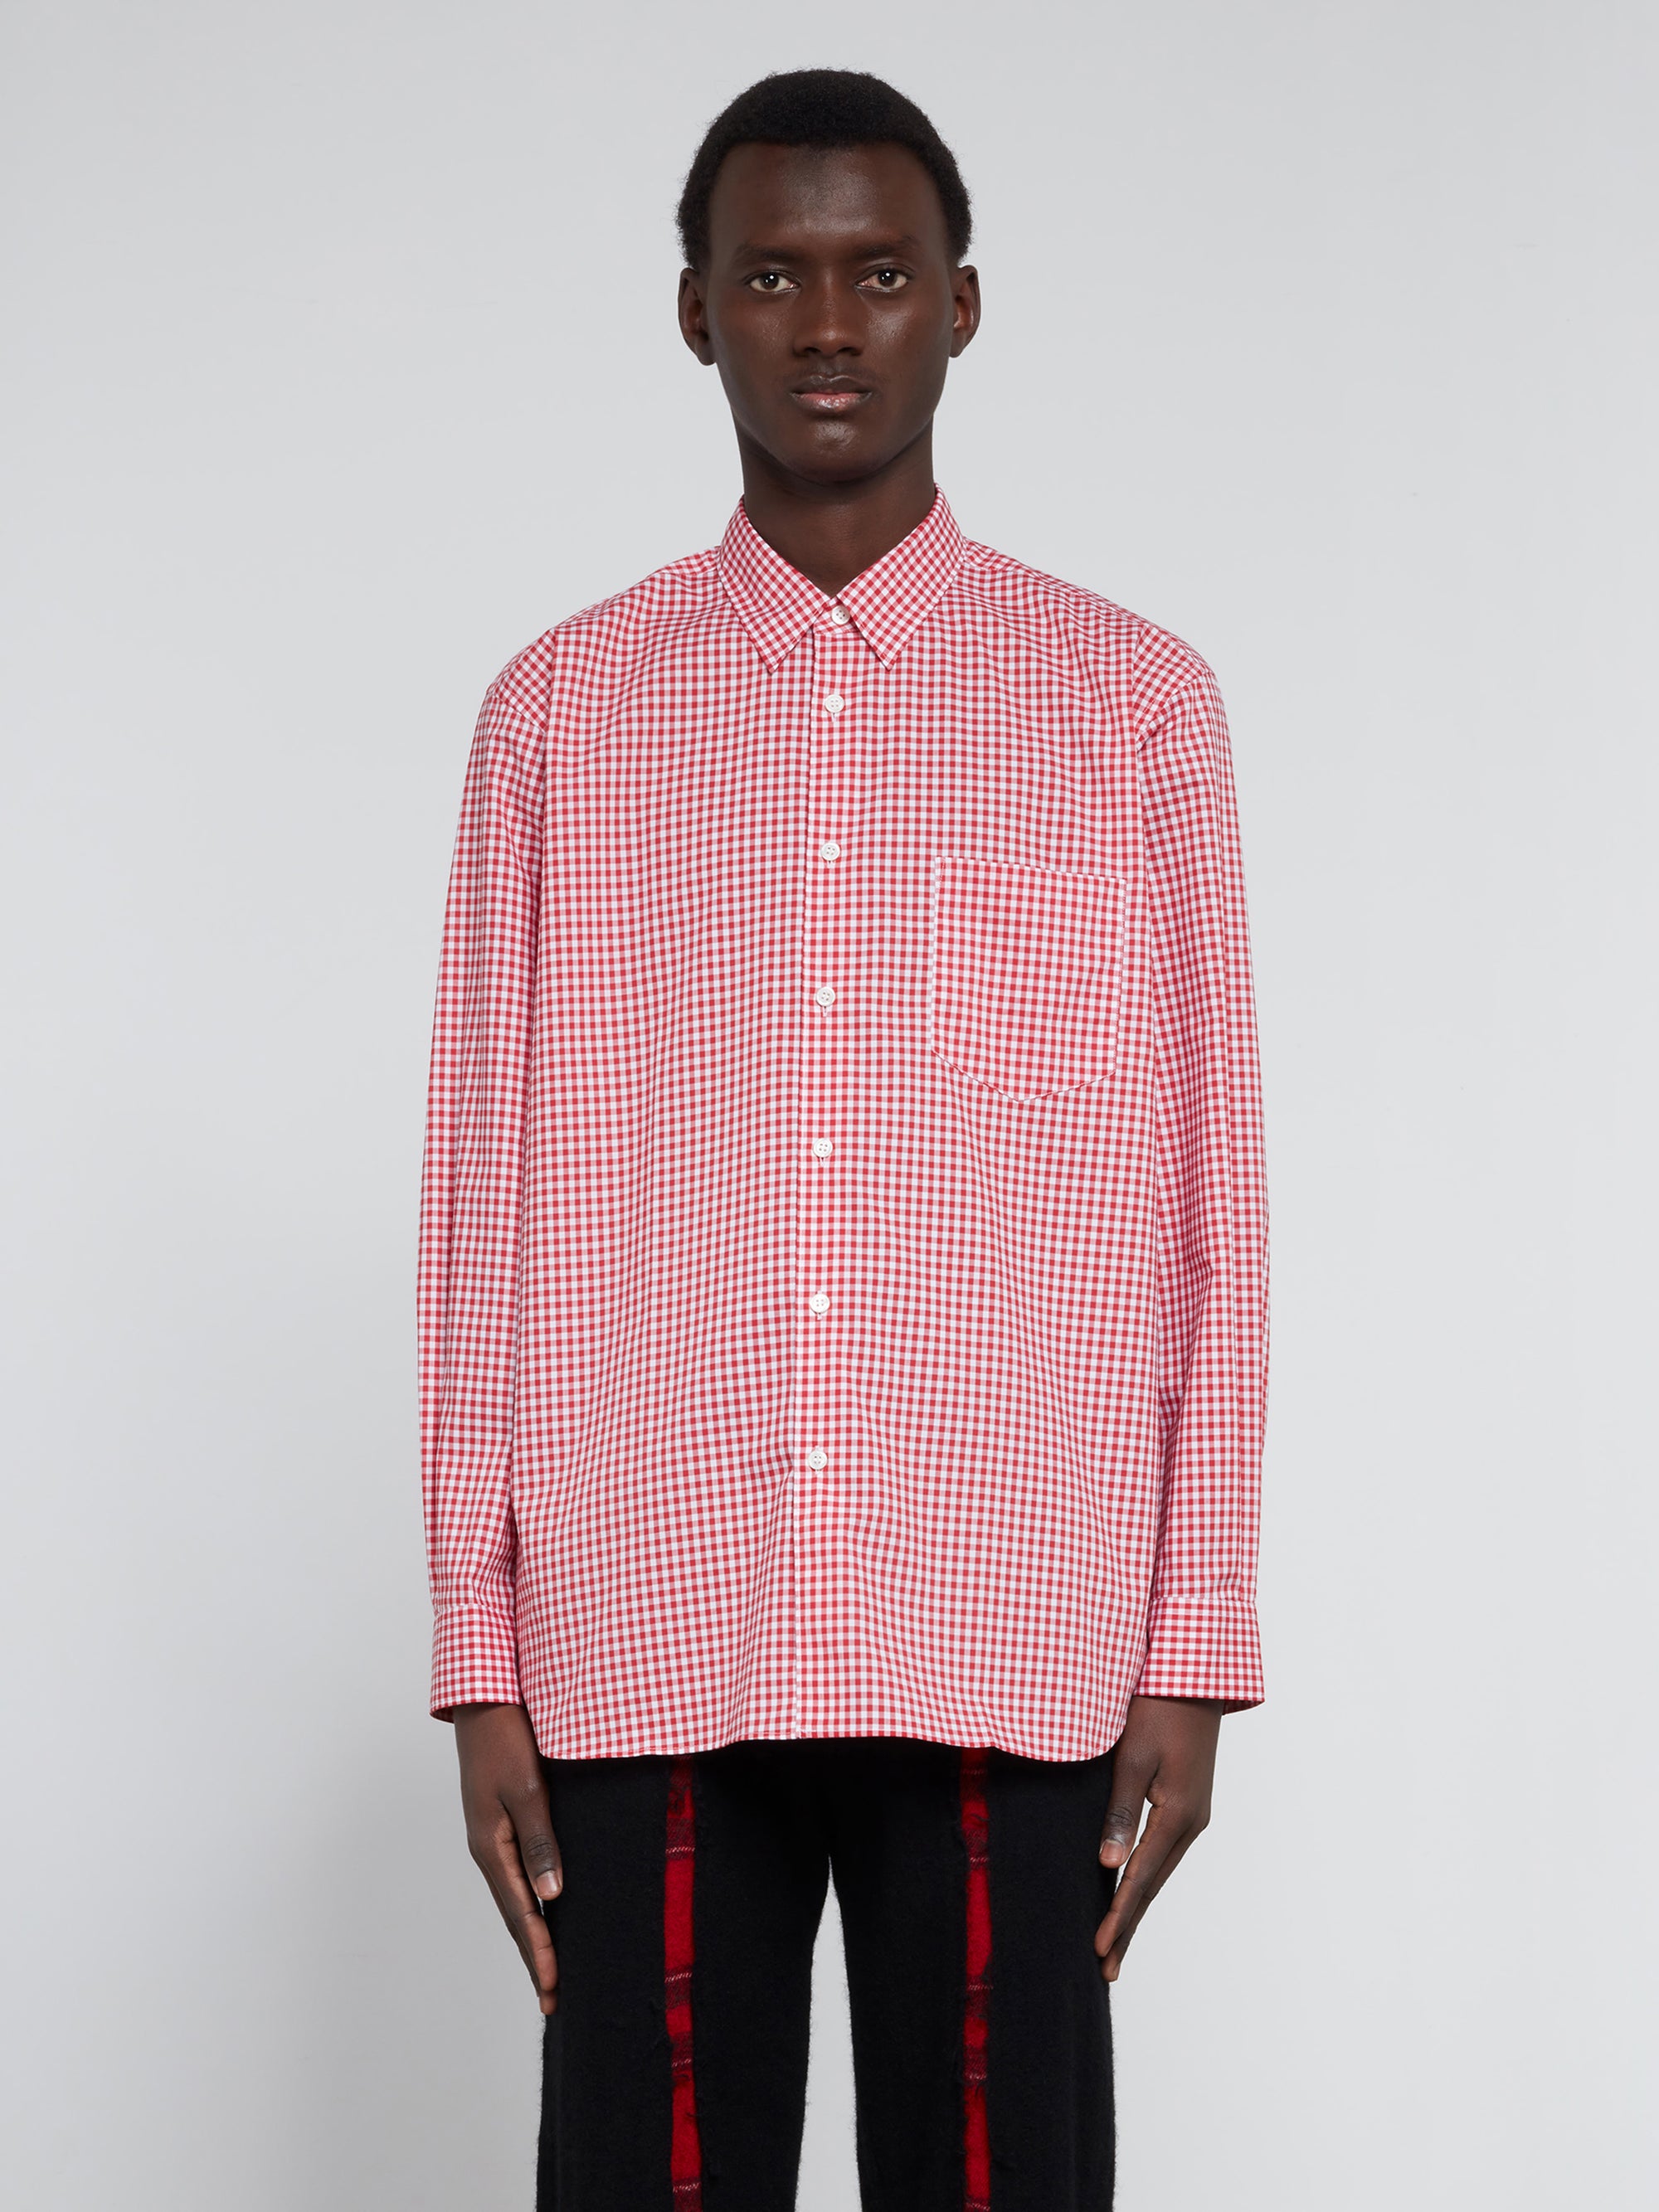 CDG Shirt Forever - Wide Fit Woven Cotton Gingham Shirt - (Red) view 1